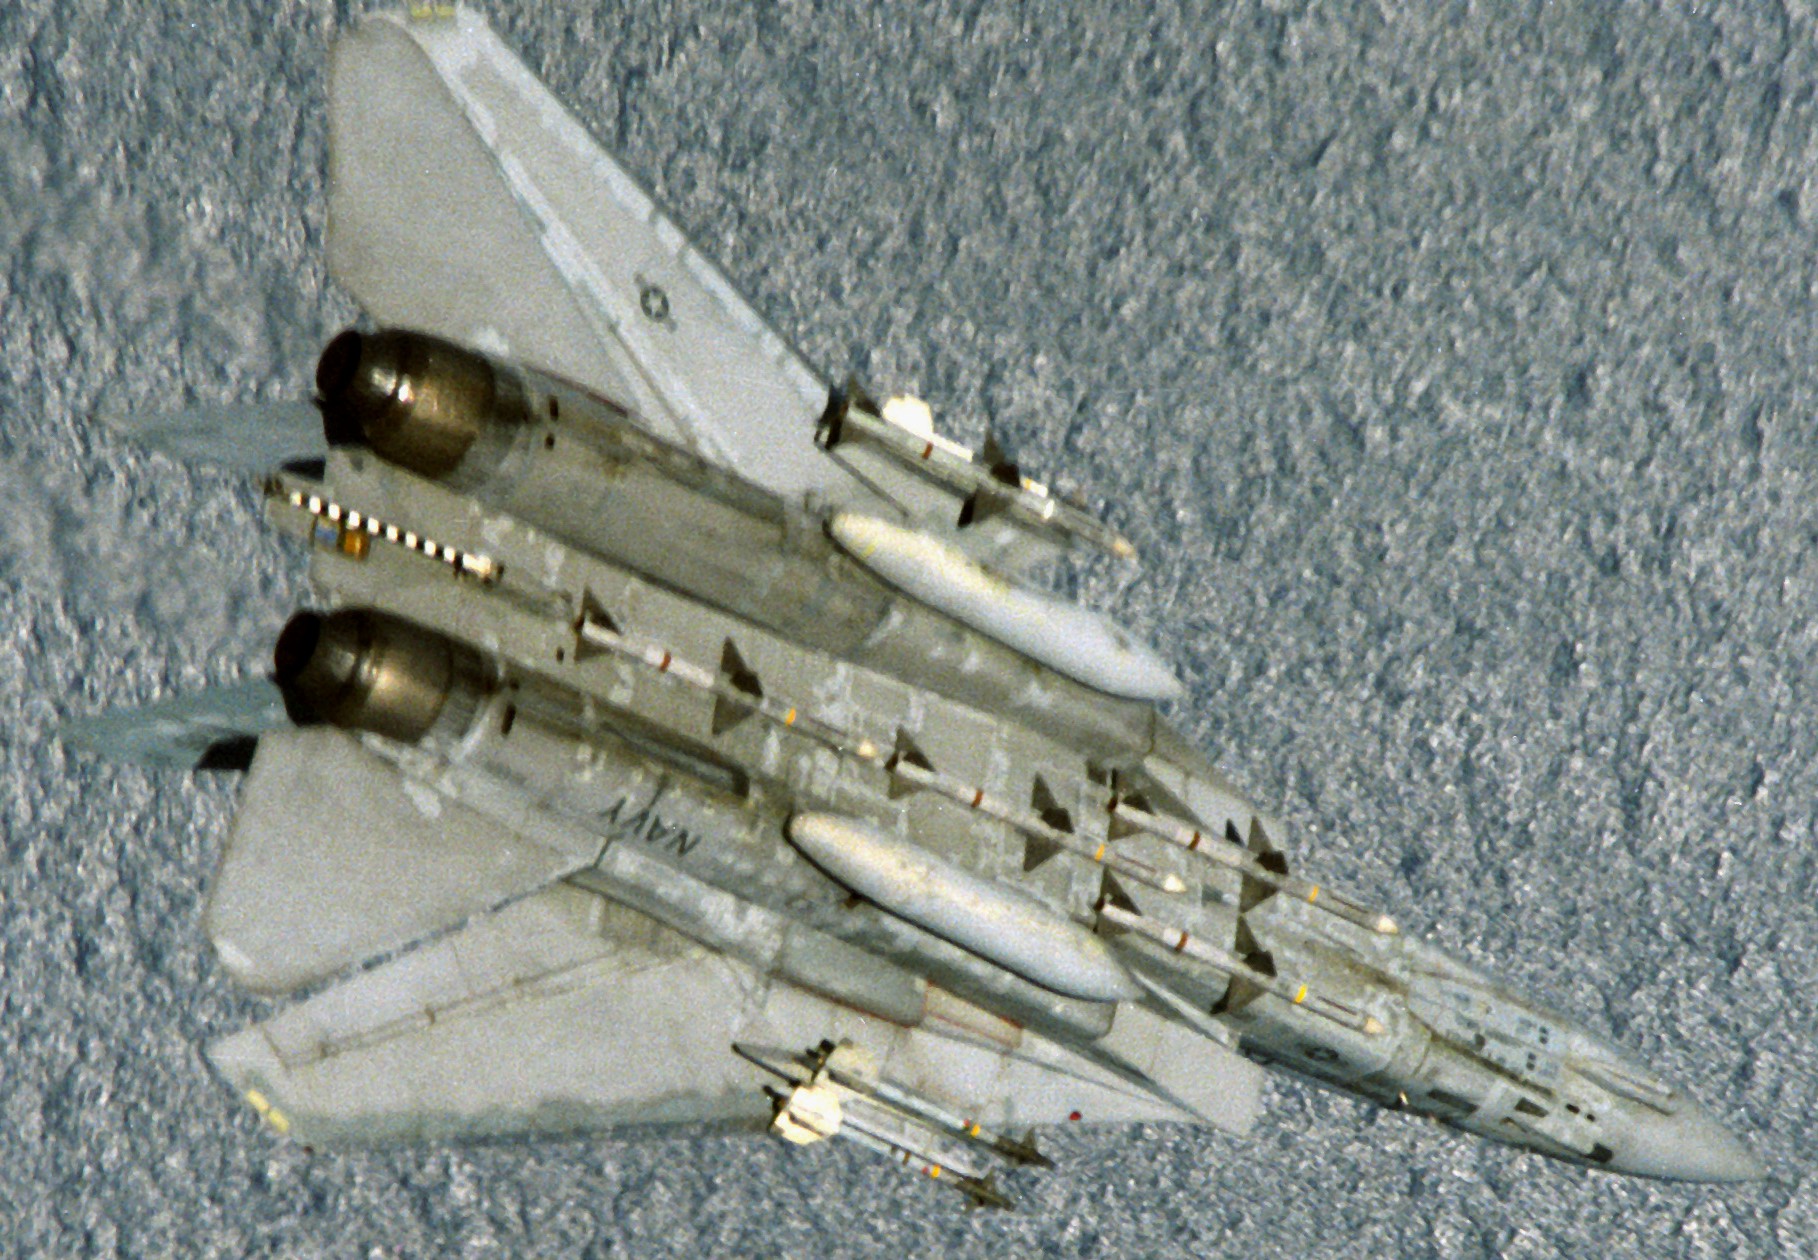 vf-24 fighting renegades fighter squadron navy f-14a tomcat carrier air wing cvw-9 aim-7 sparrow aim-9 sidewinder missile 20